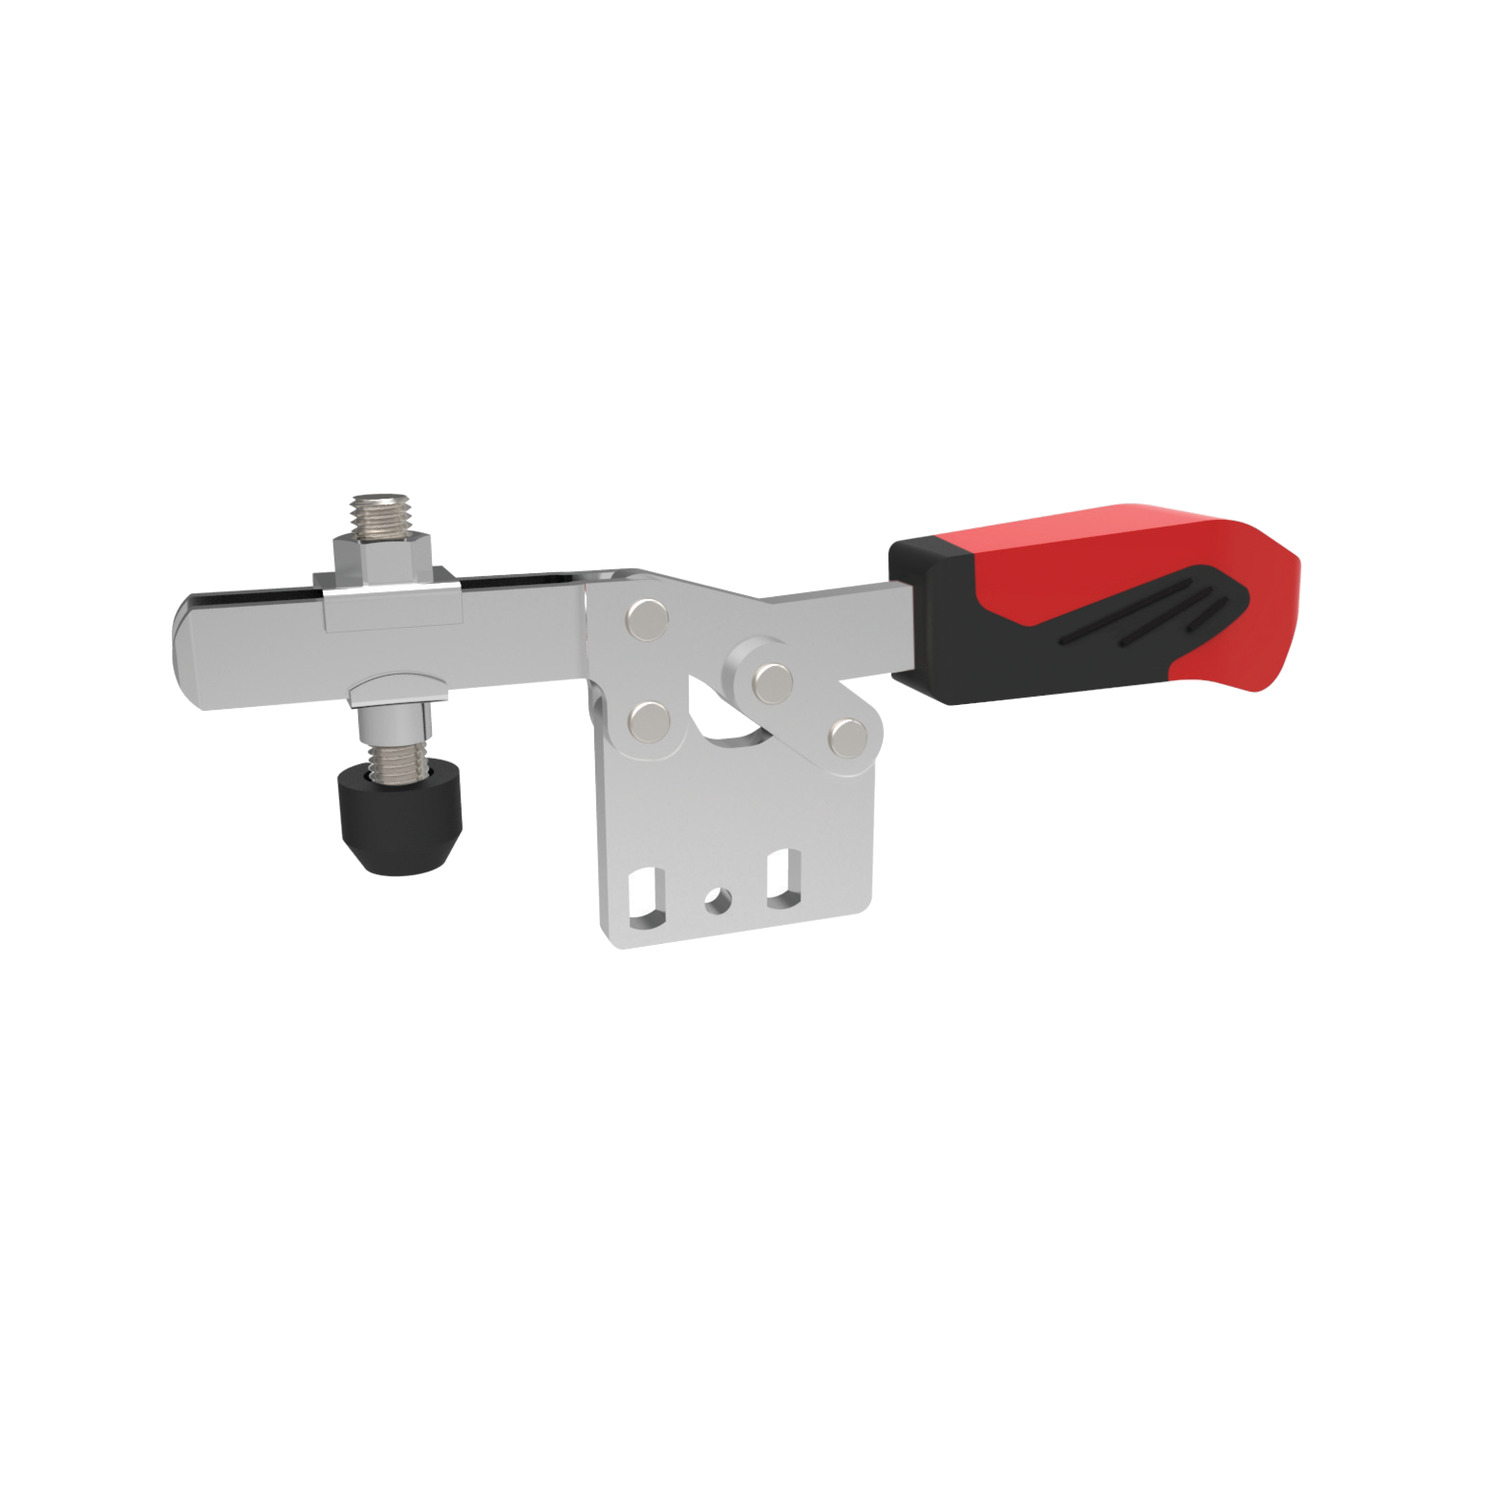 Horizontal Acting Toggle Clamps Horizontal acting toggle clamps with open clamping arm and veritcal base for side mounting. Ergonmic, oil resistant handle with large grip surface for soft components. Holding forces from 0,25kN up to 5,0kN.